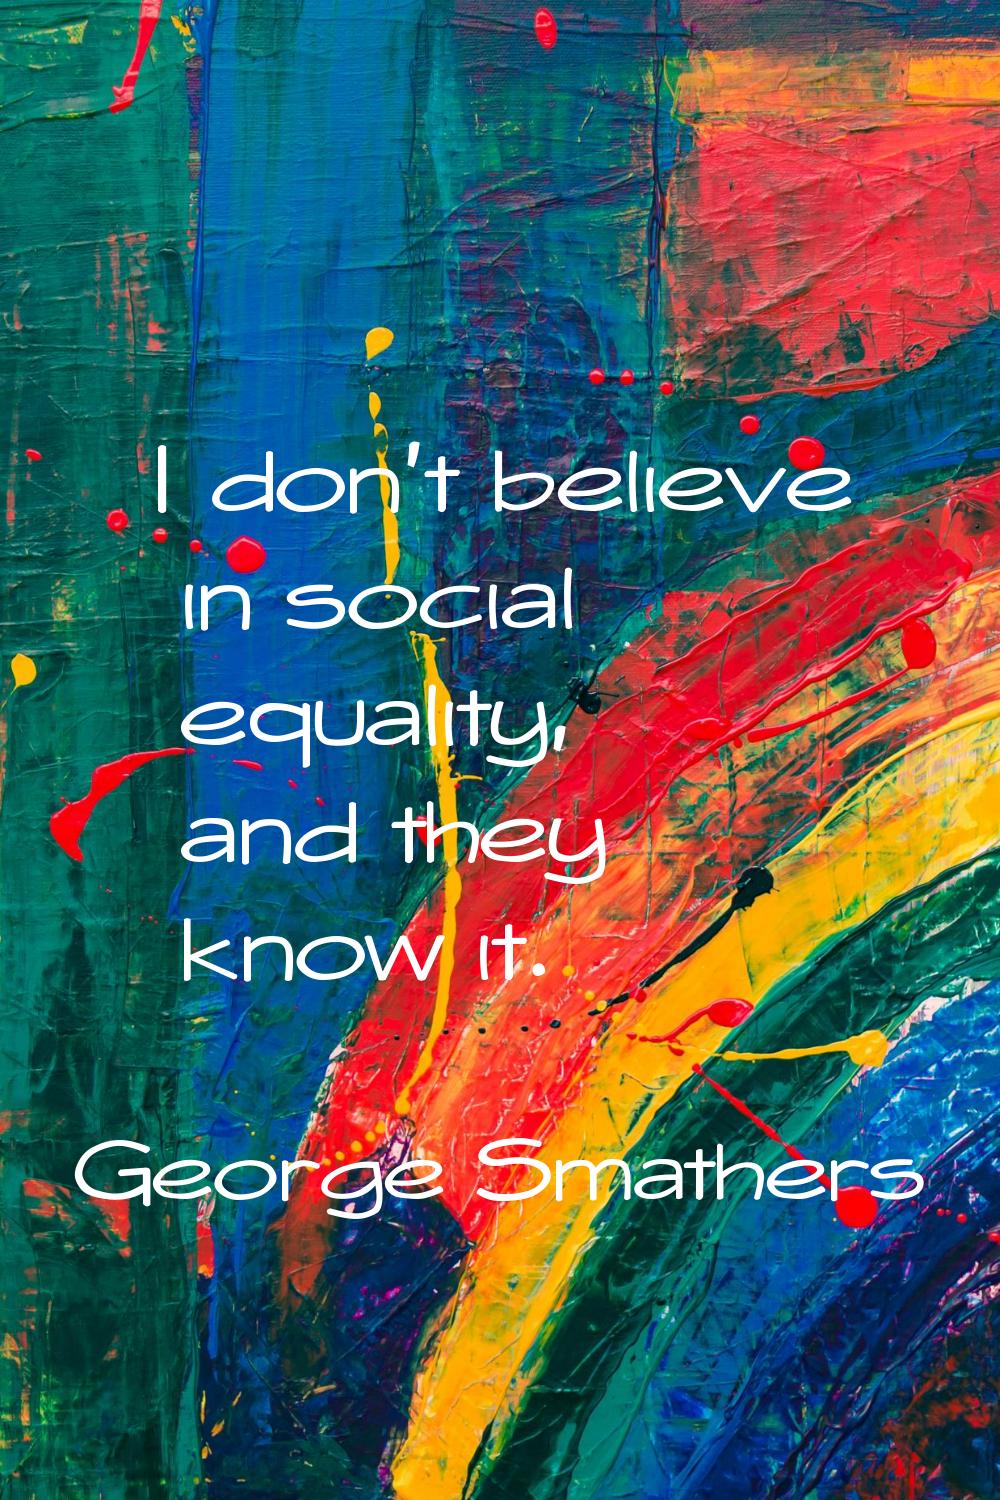 I don't believe in social equality, and they know it.